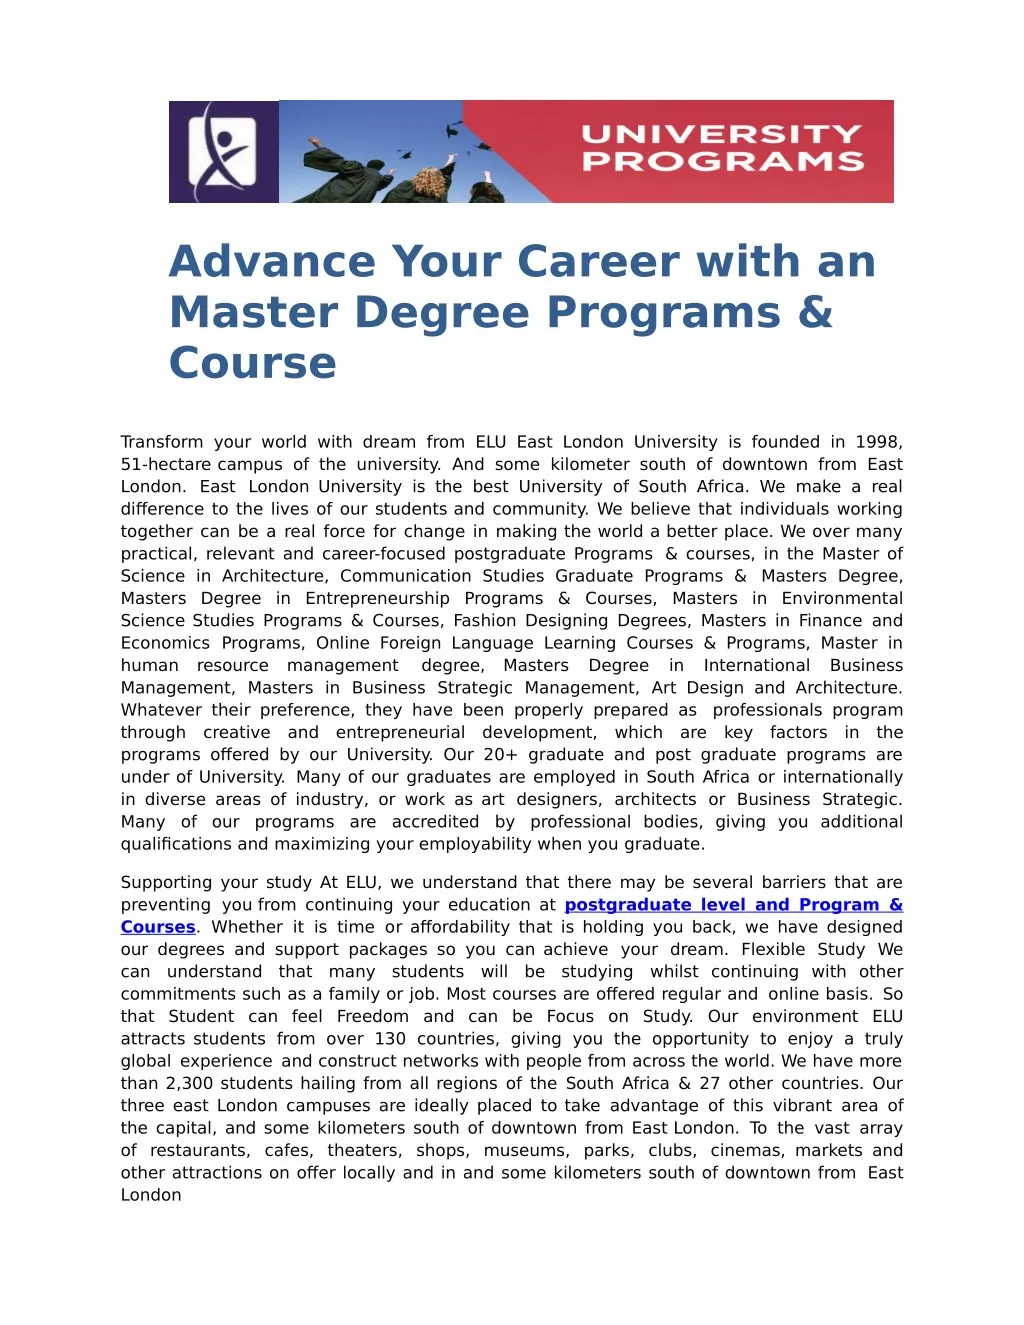 advance your career with an master degree